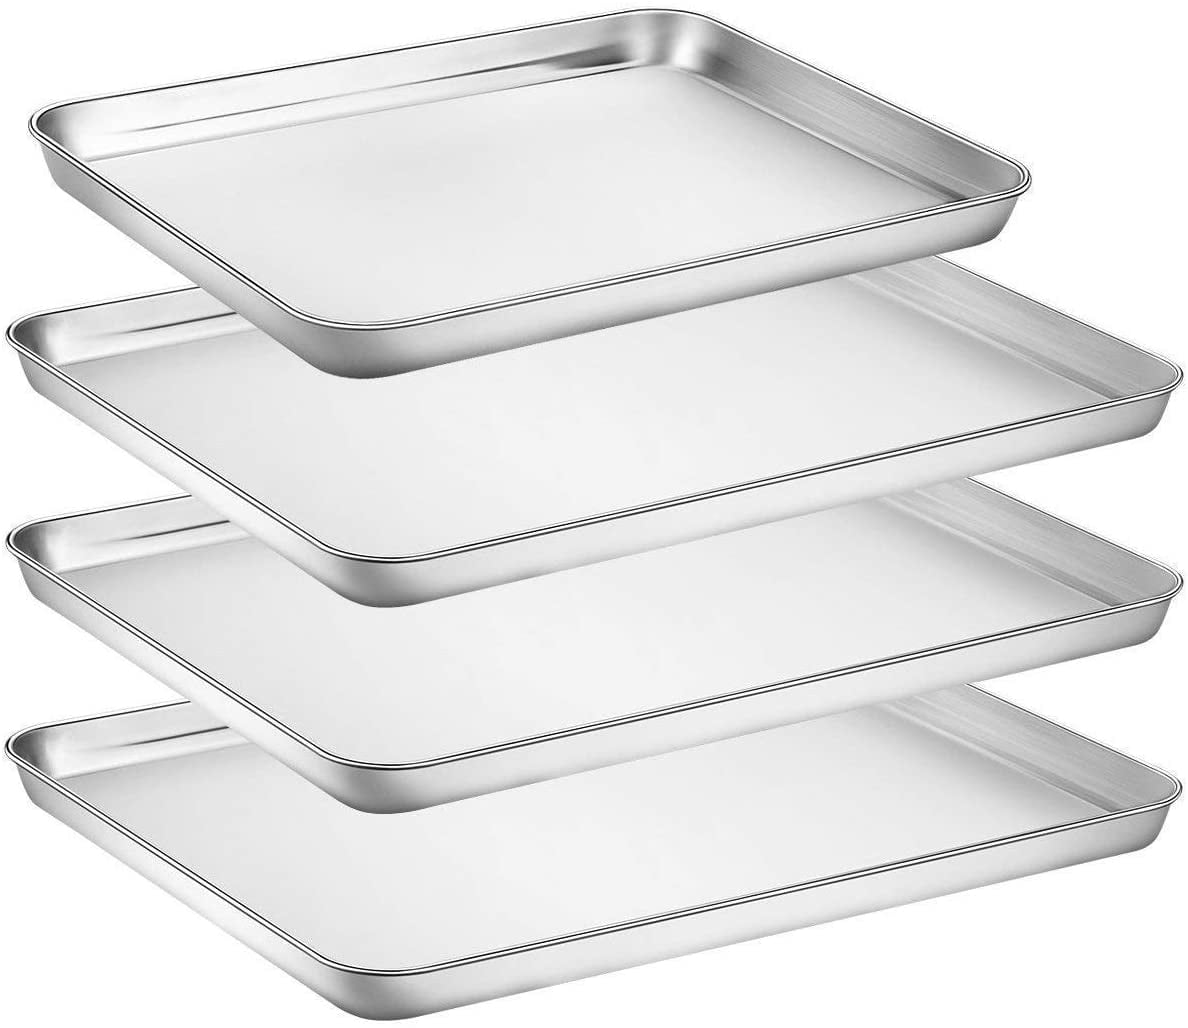 Stainless Steel Baking Pan 12 x 10 x 1 inch 3 Piece 